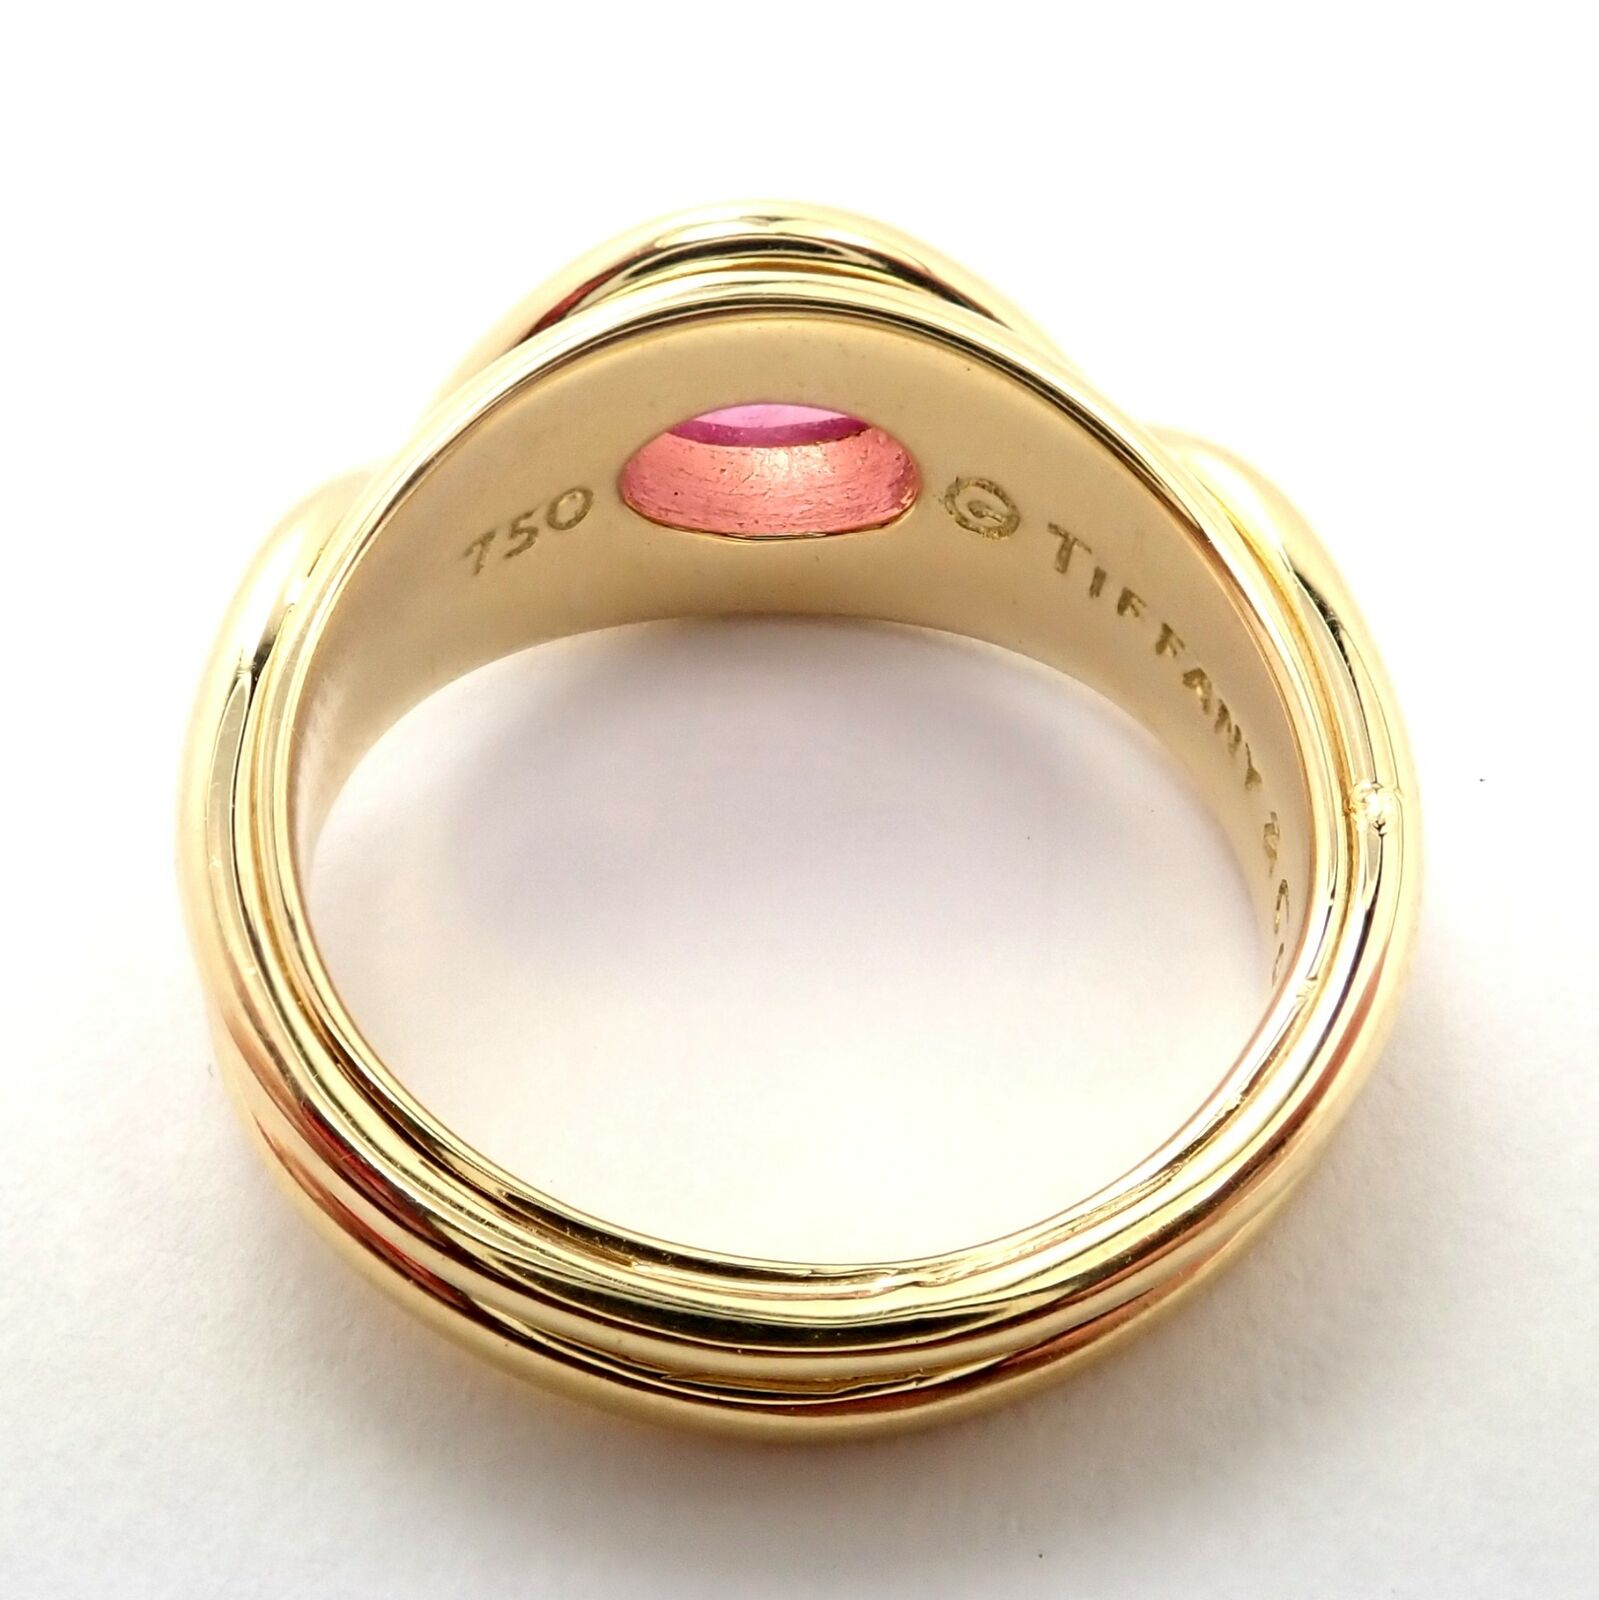 Tiffany & Co. Jewelry & Watches:Fine Jewelry:Rings Rare! Authentic Tiffany & Co 18k Yellow Gold Pink Tourmaline Cabochon Band Ring